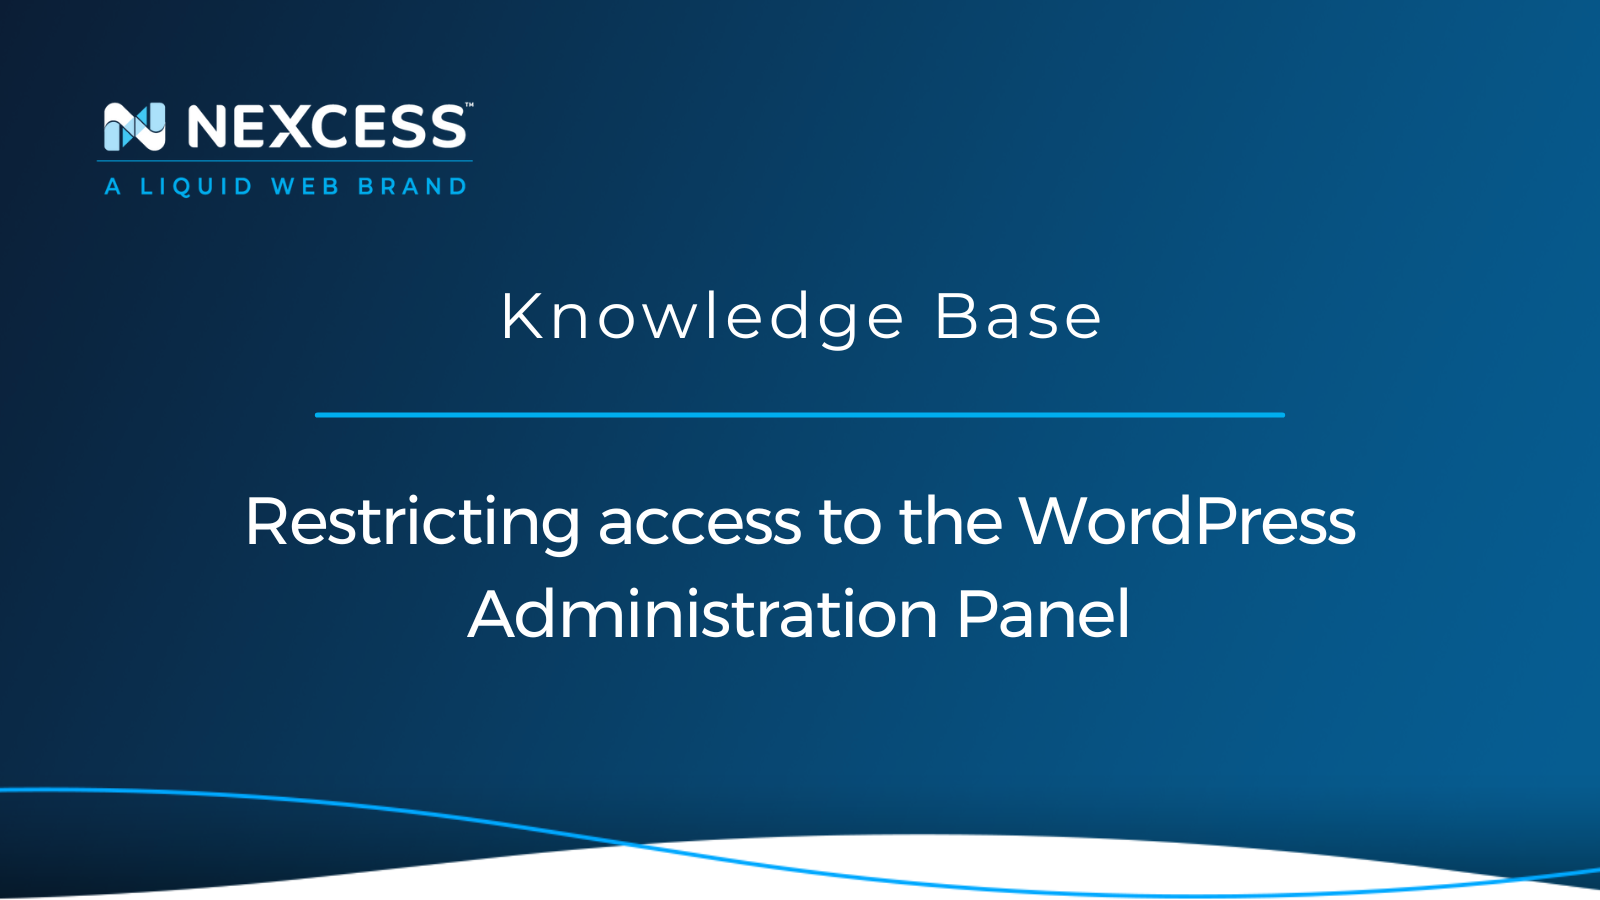 Restricting access to the WordPress Administration Panel